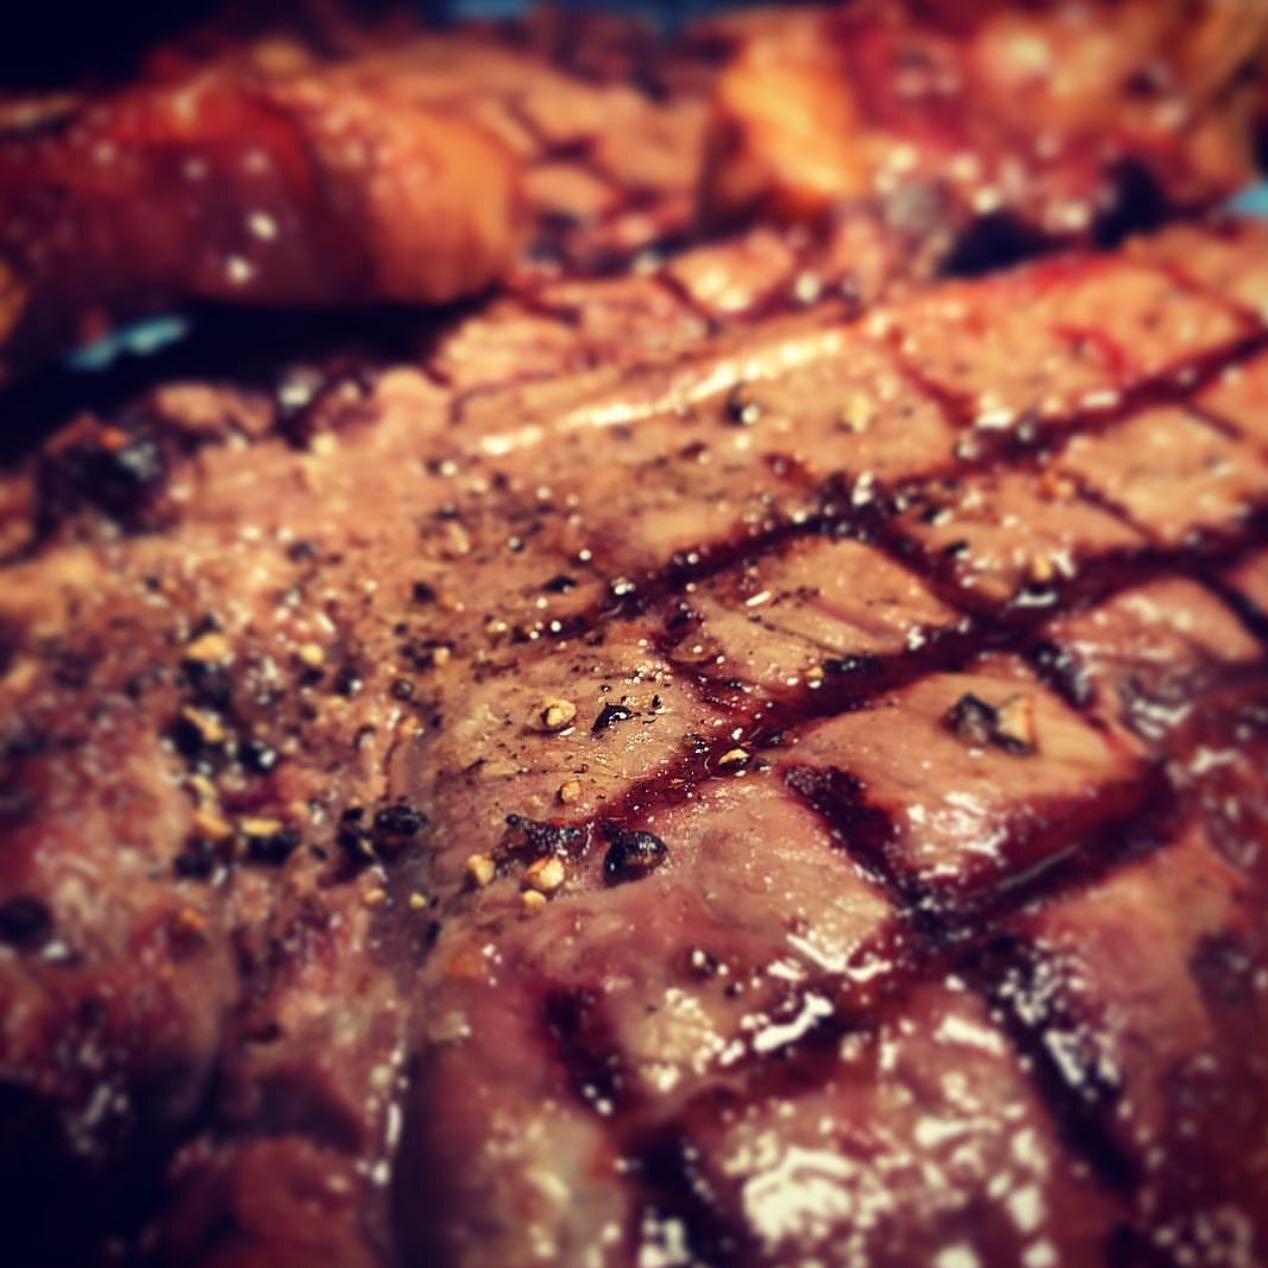 Steak night we are ready for you! Book a last minute table online now!!

#steak #food #foodporn #foodie #meat #bbq #beef #instafood #grill #steakhouse #dinner #foodstagram #foodphotography #meatlover #delicious #foodlover #steaklover #ribeye #barbecu